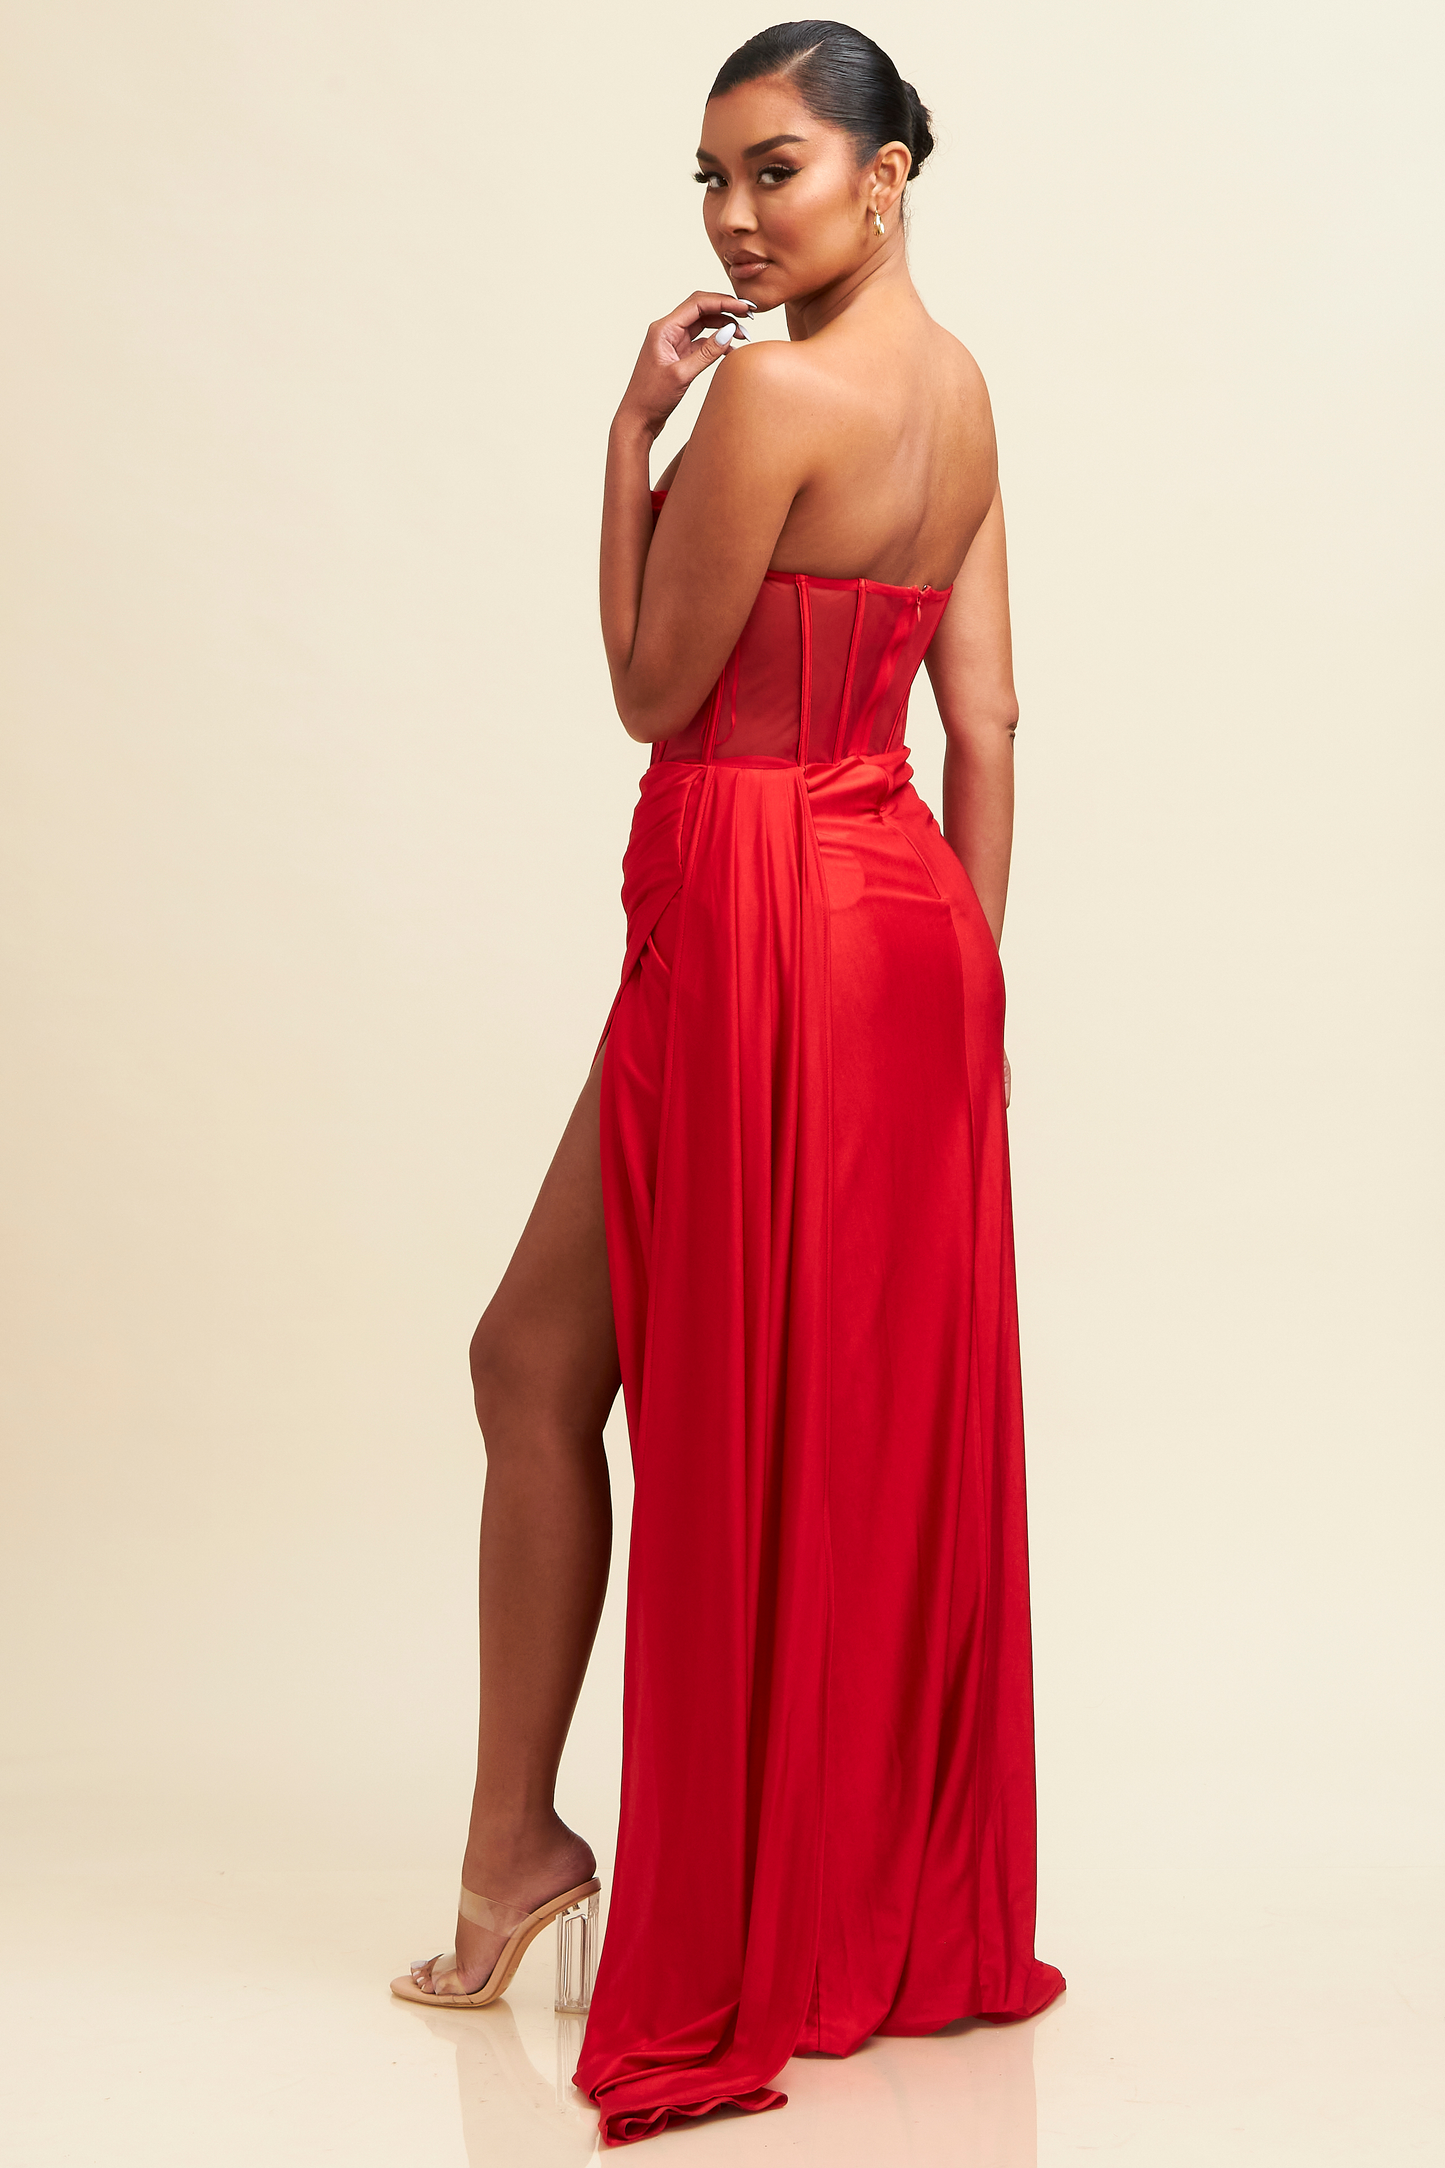 Elegant Strapless Red Couture Corset Maxi Dress with Middle Slit